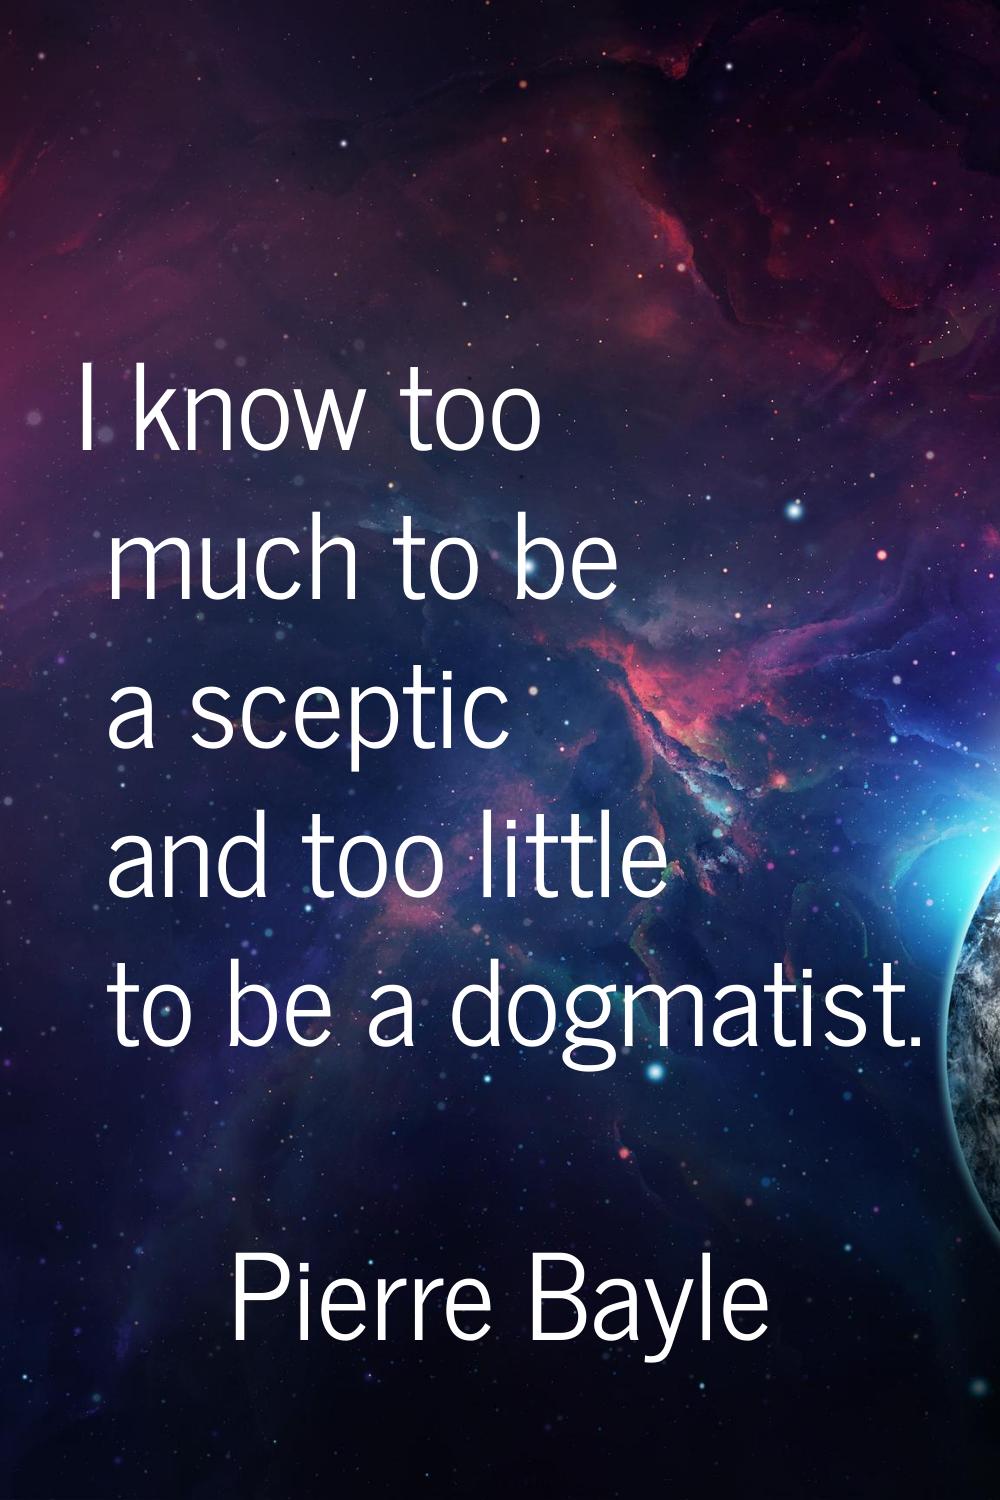 I know too much to be a sceptic and too little to be a dogmatist.